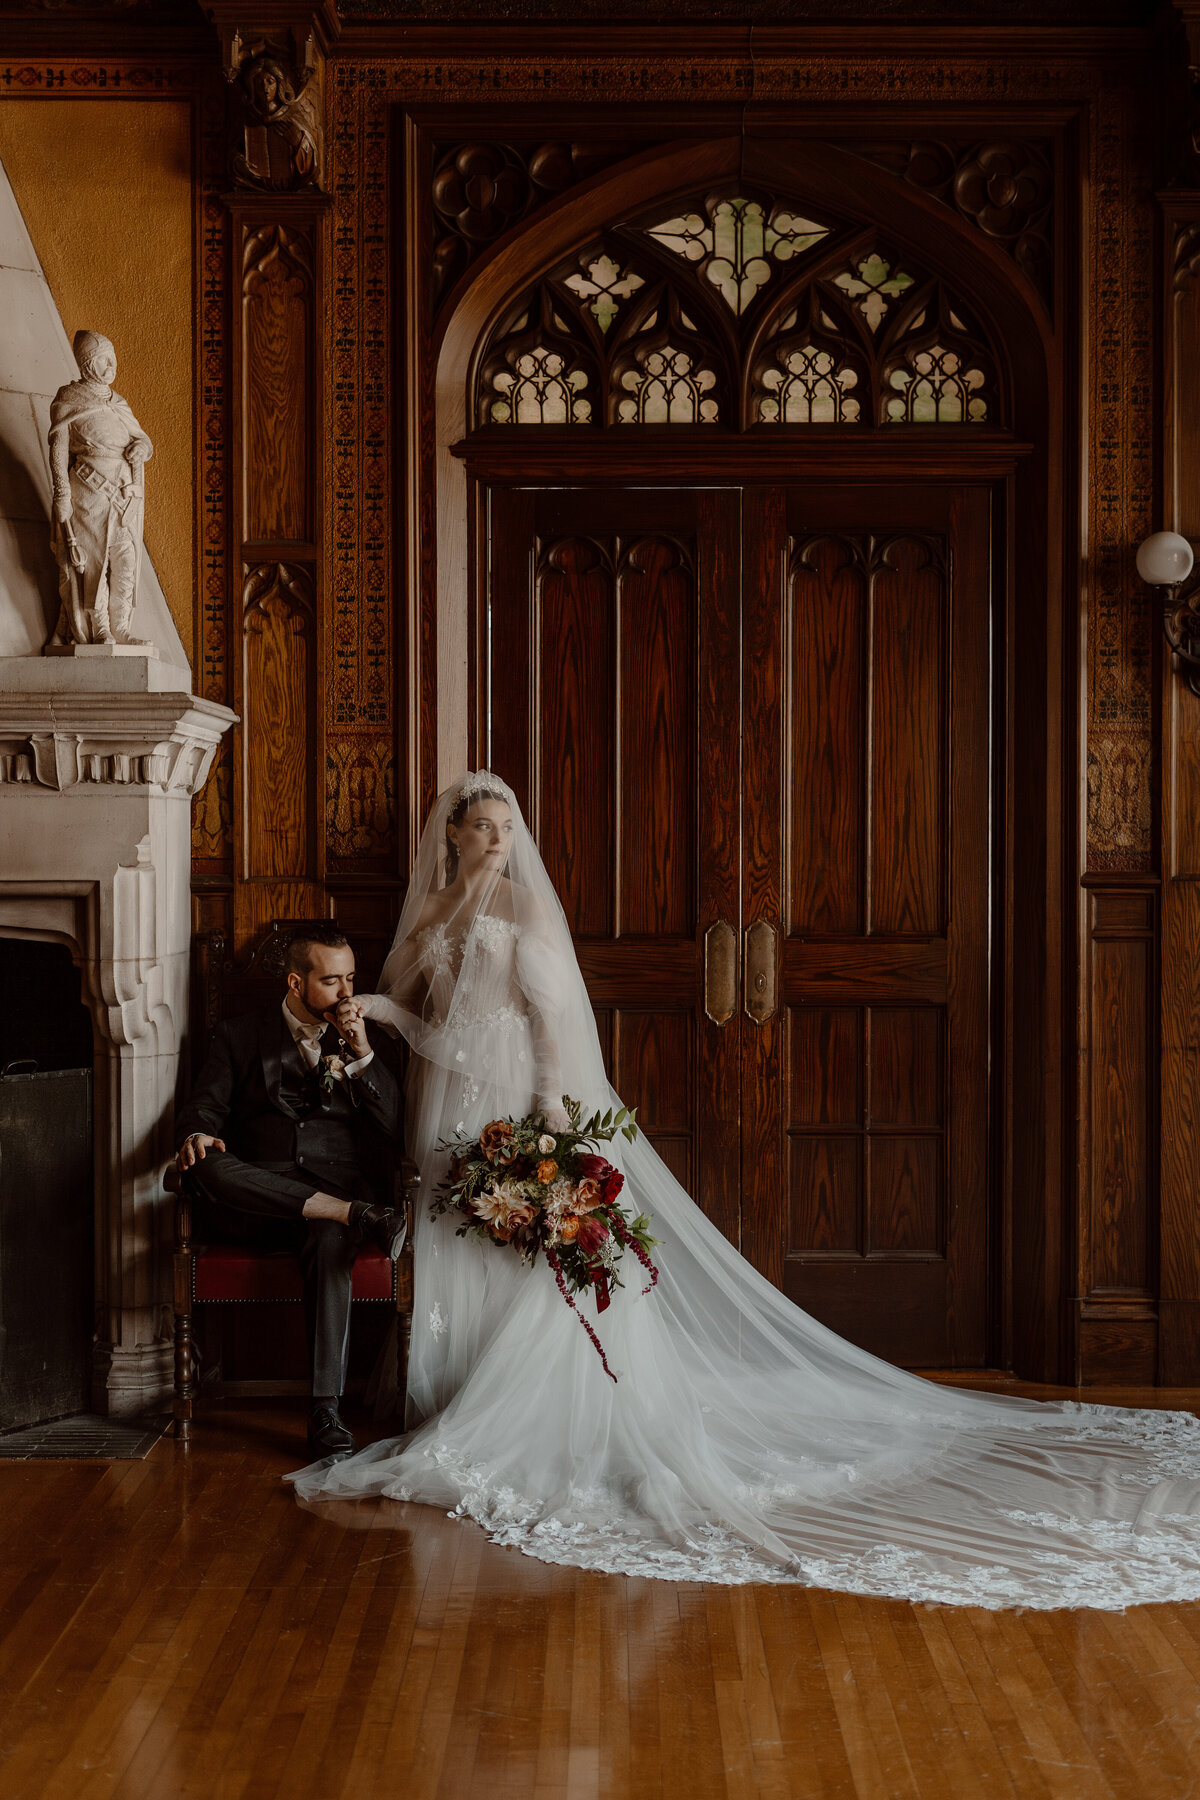 Bride and groom in a historic, elegant room. The bride, dressed in a flowing white gown with a long veil and holding a bouquet of colorful flowers, stands gracefully next to her seated groom. The groom, in a black suit, kisses the bride's hand, adding a romantic touch to the scene.